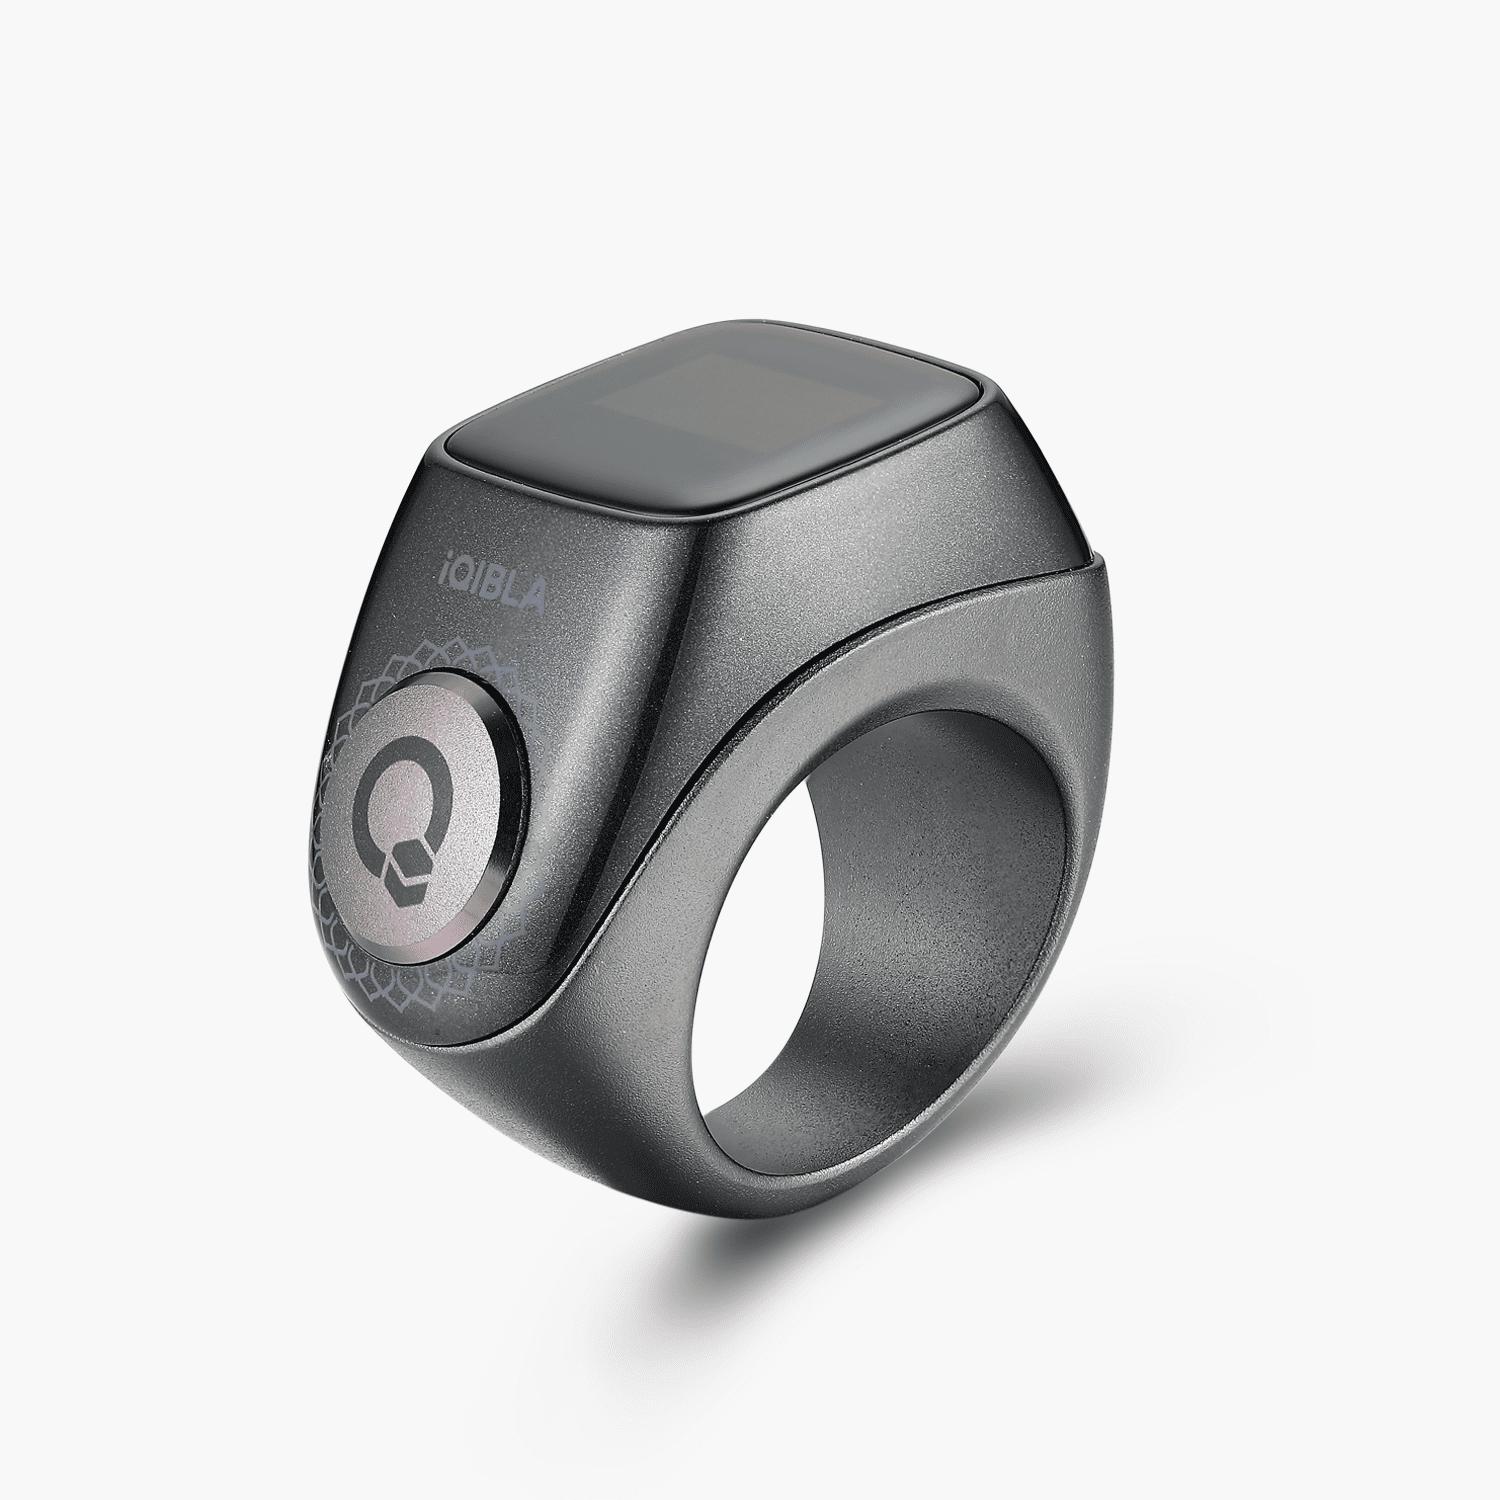 Ring One : The most advanced Smart Ring for you | Indiegogo